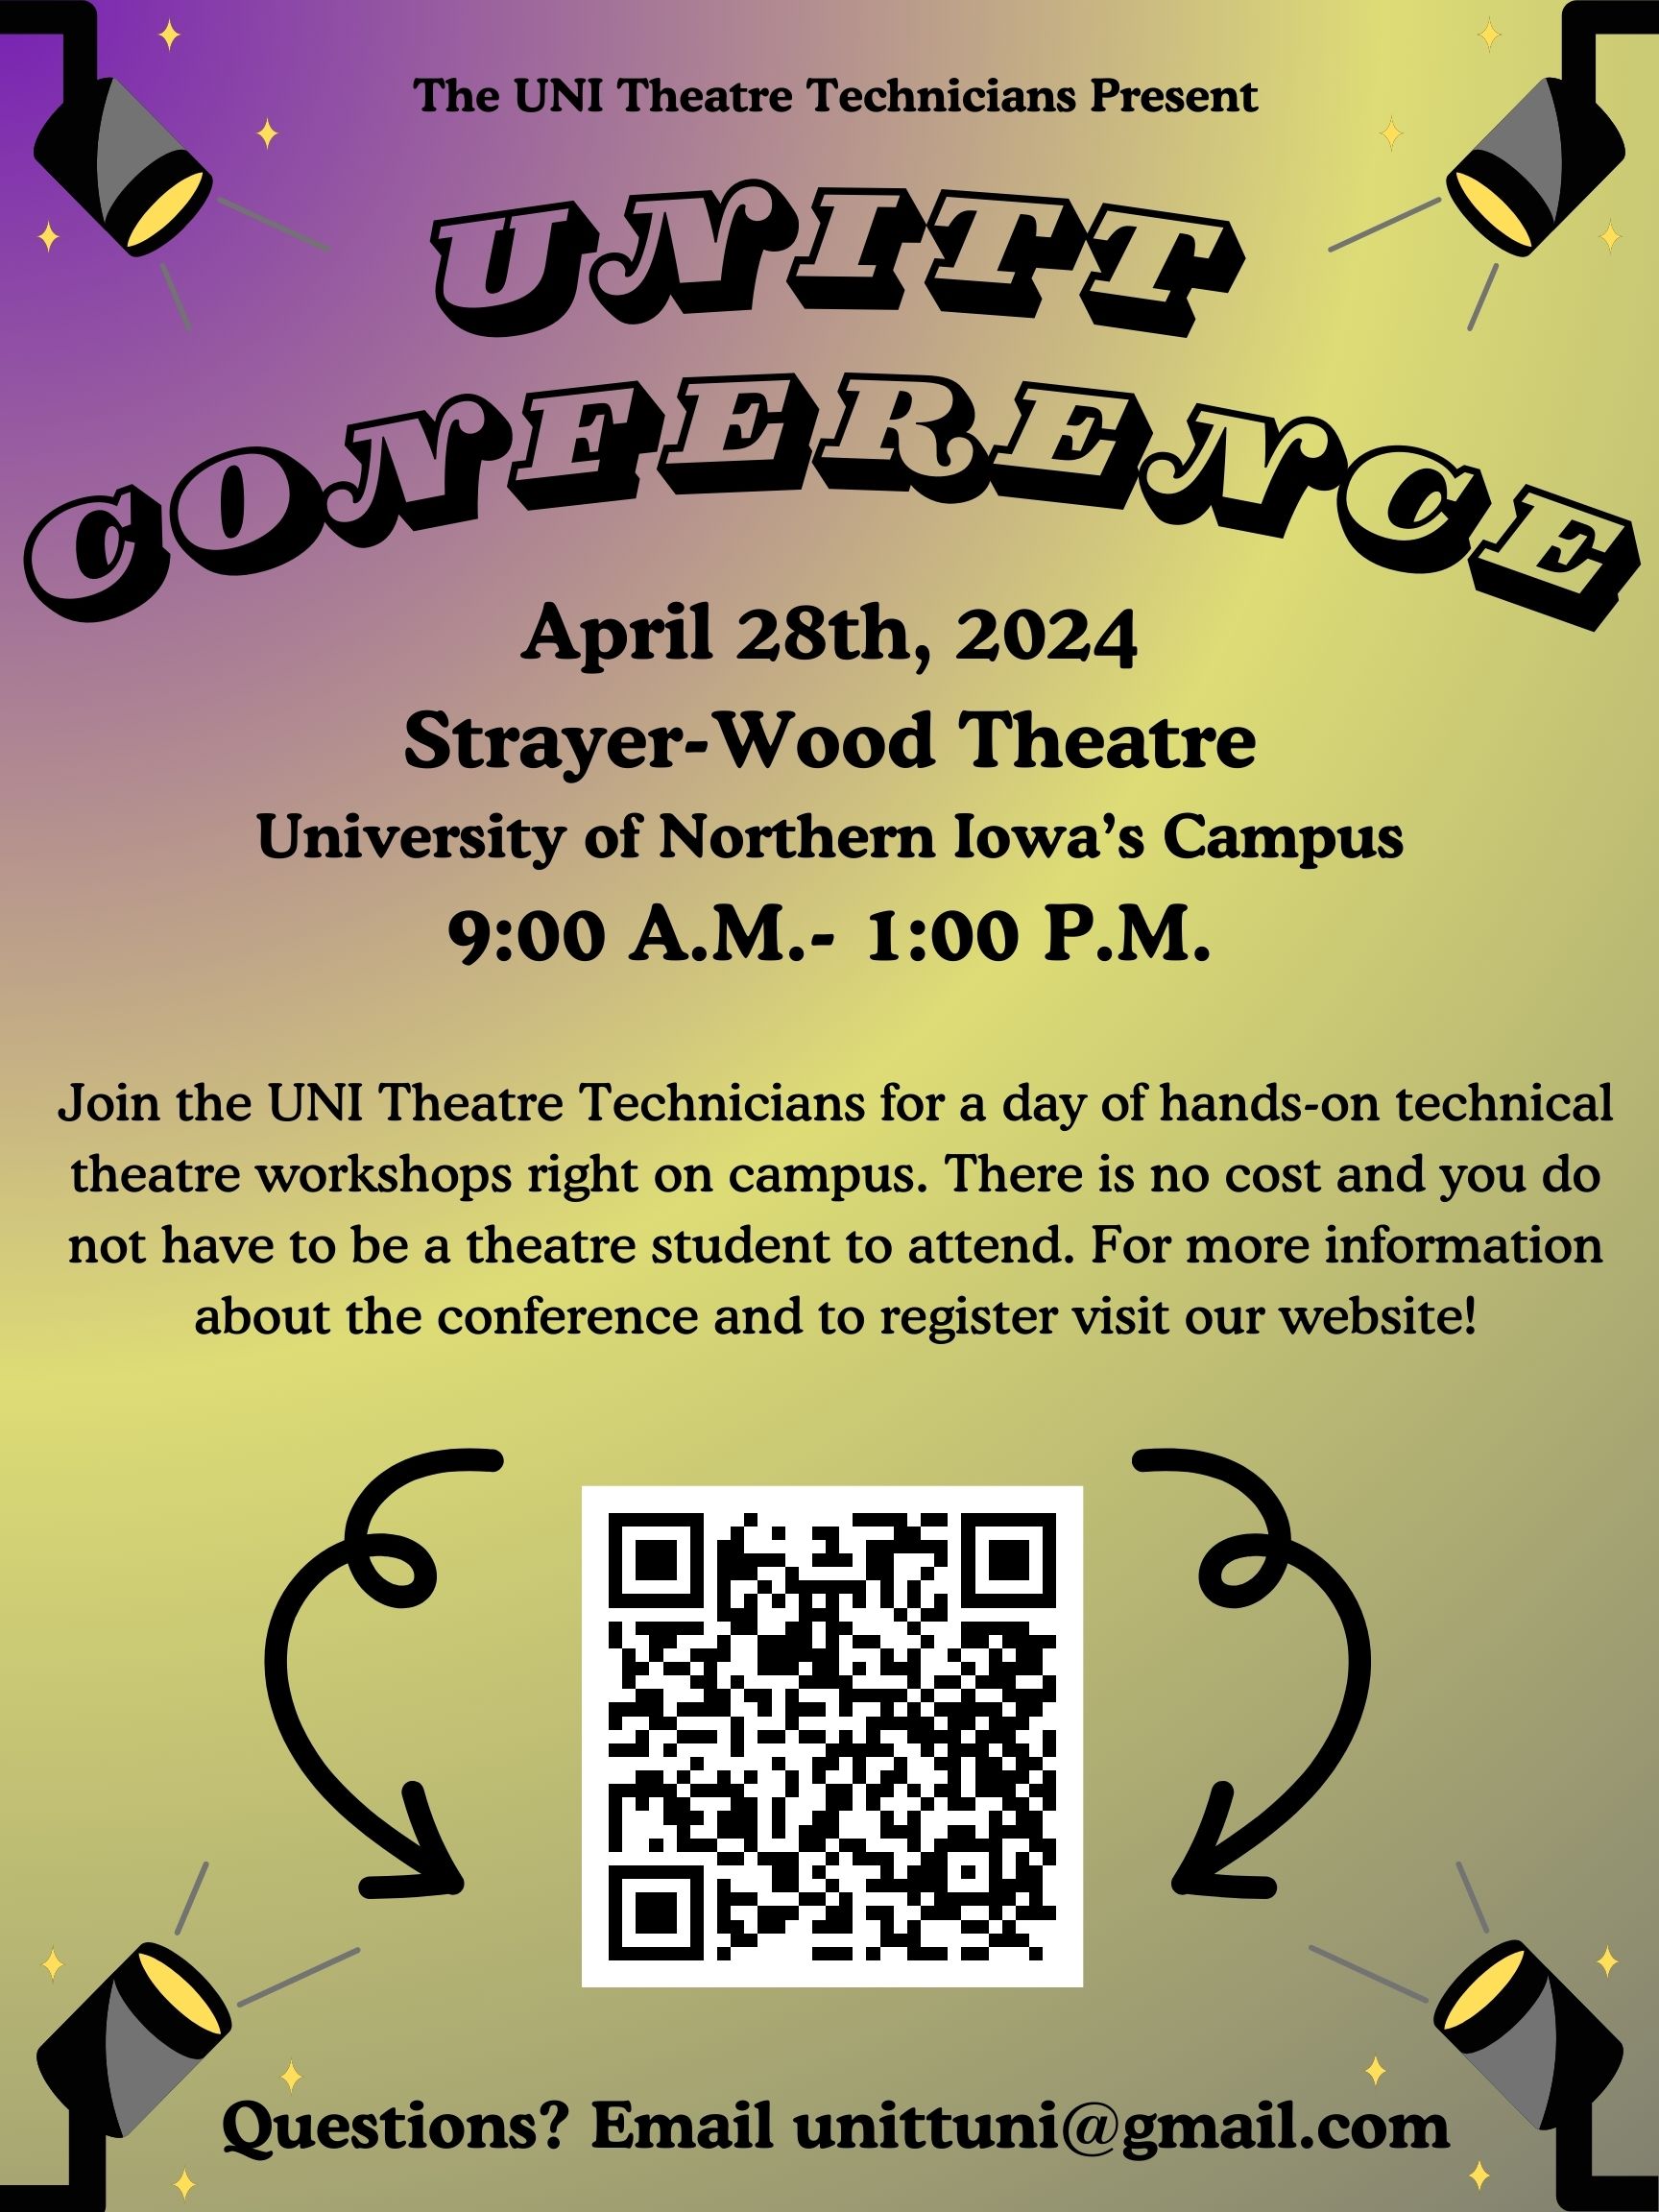 UNITT Conference - Saturday April 28th, 2024 from 9:00 AM - 1:00 PM